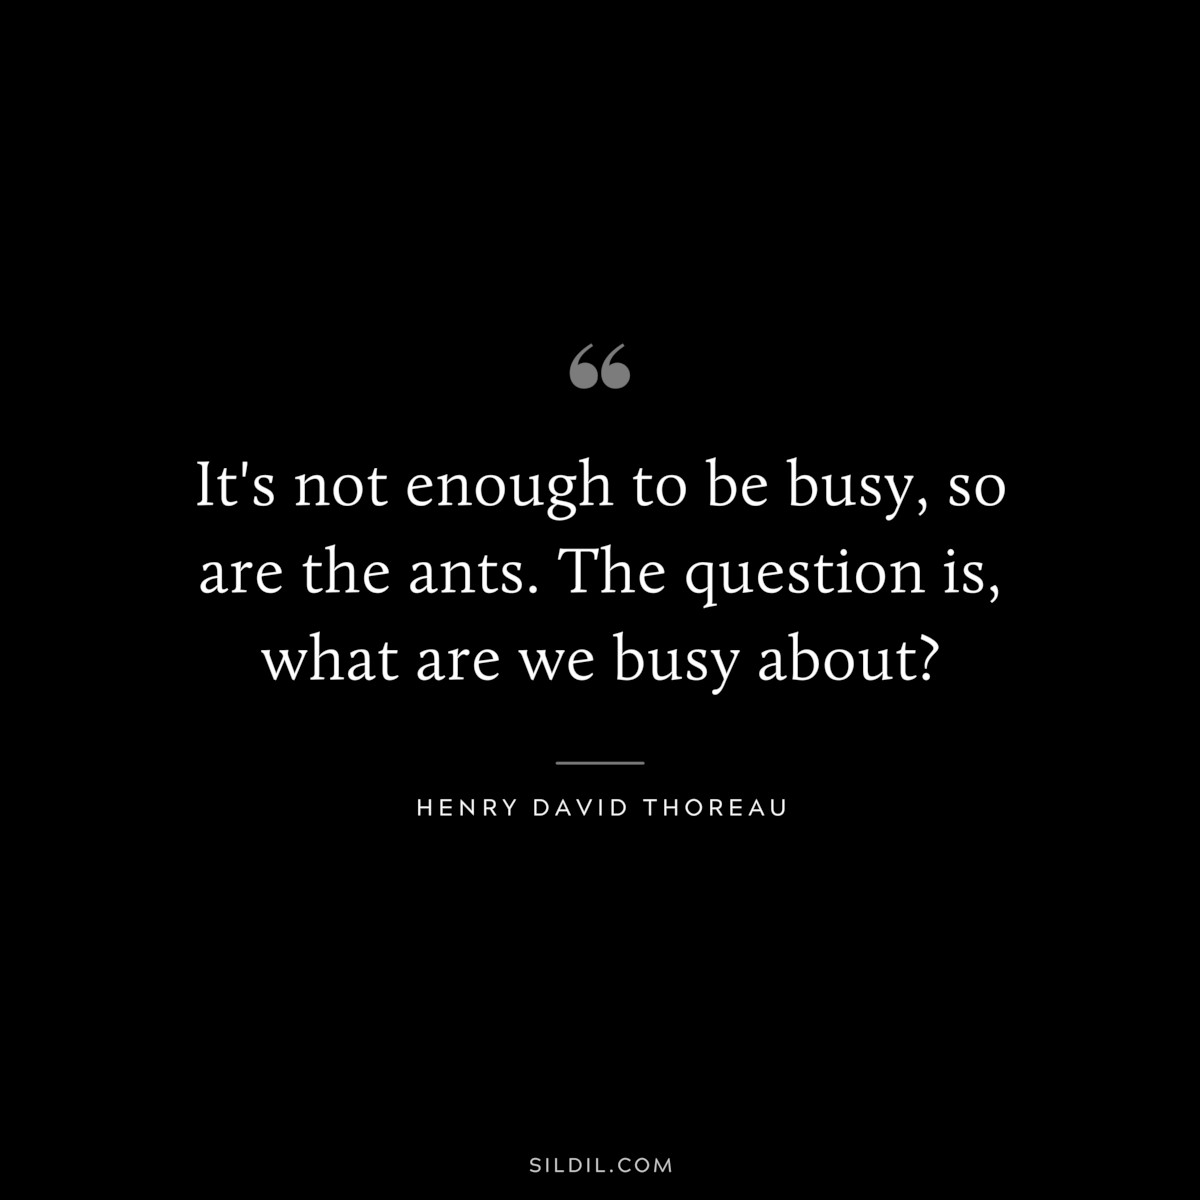 It's not enough to be busy, so are the ants. The question is, what are we busy about? ― Henry David Thoreau